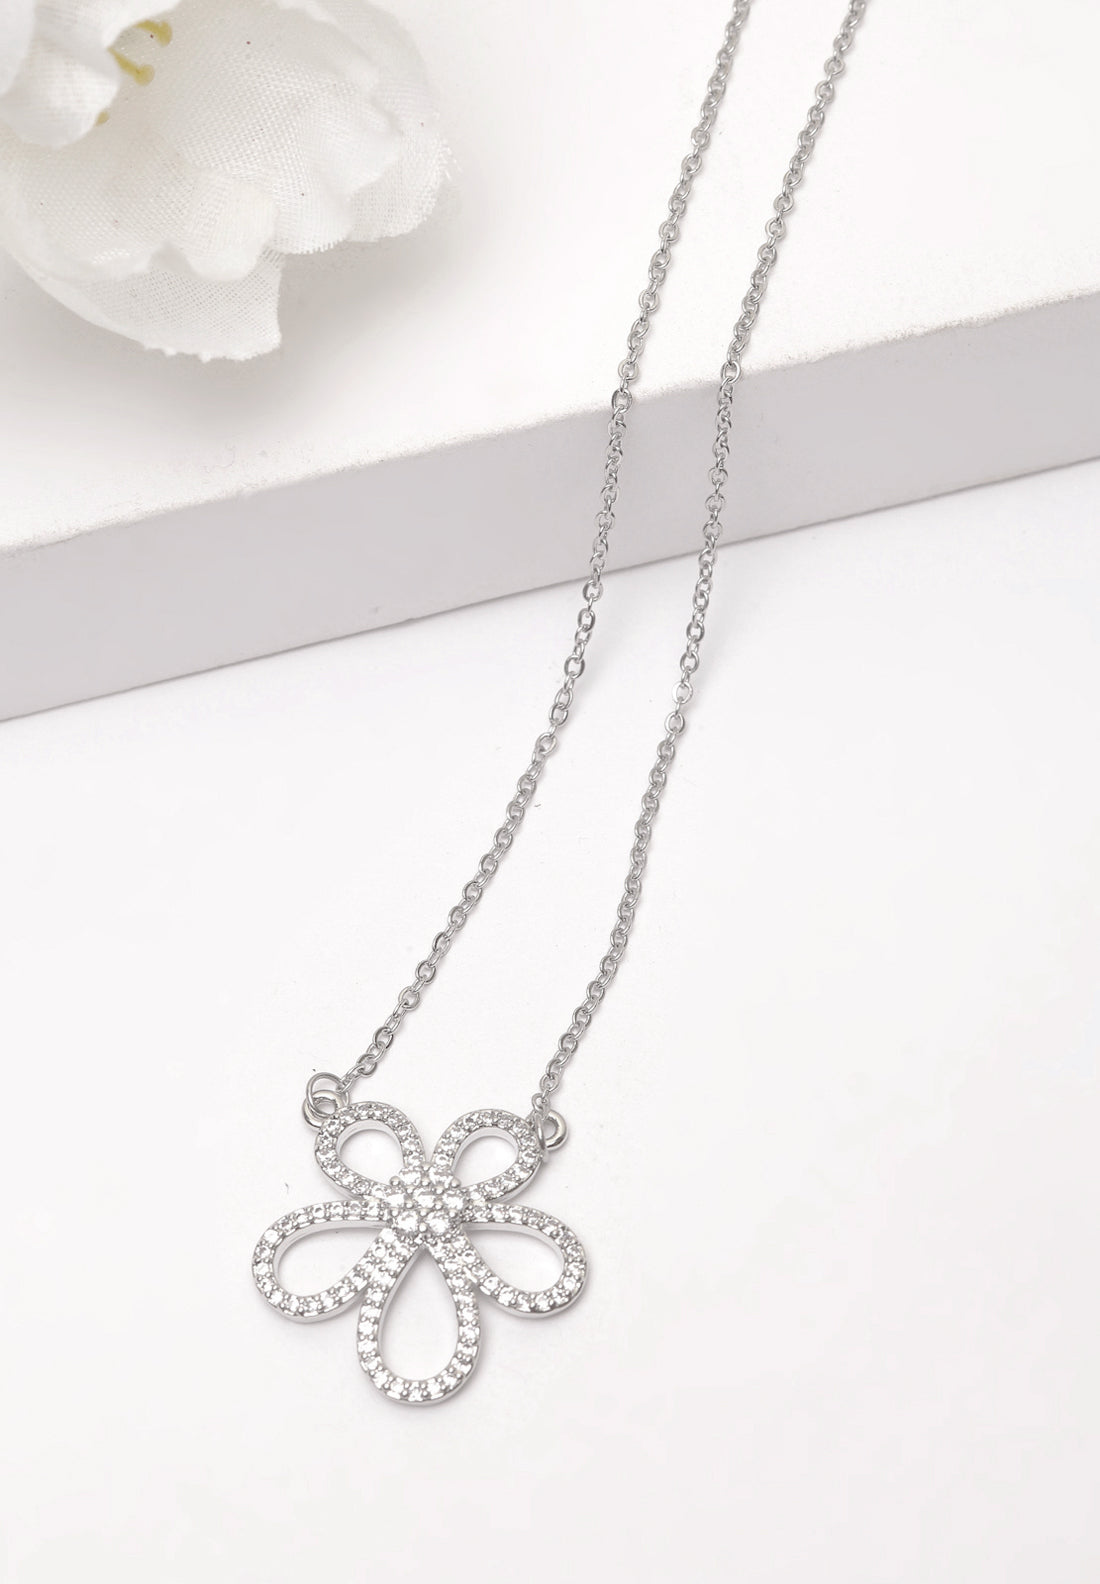 White Floral Crystal Necklace